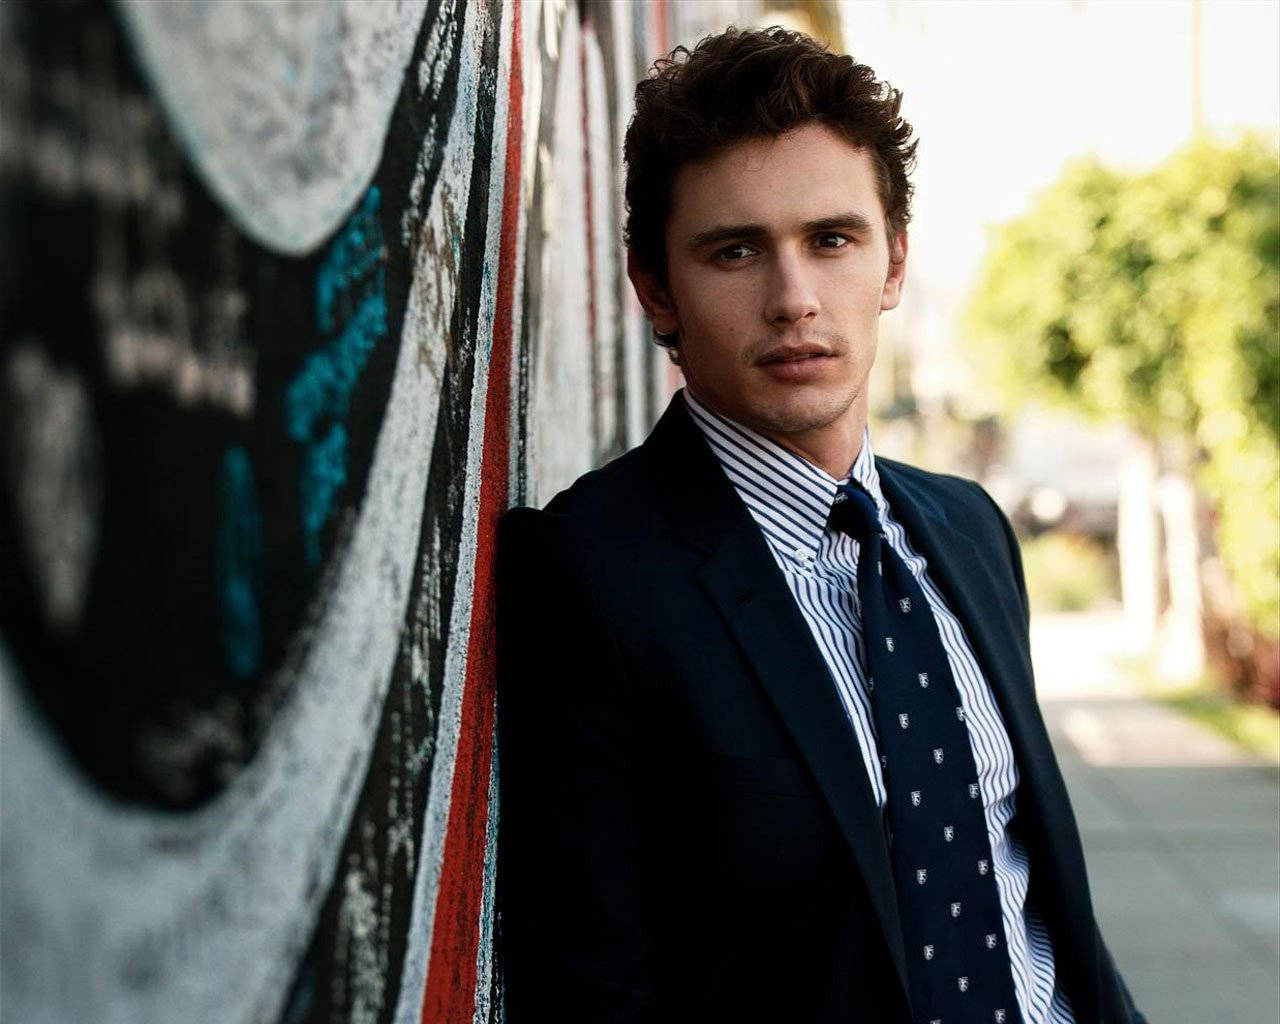 Hollywood Star James Franco Posing During A Street Photoshoot